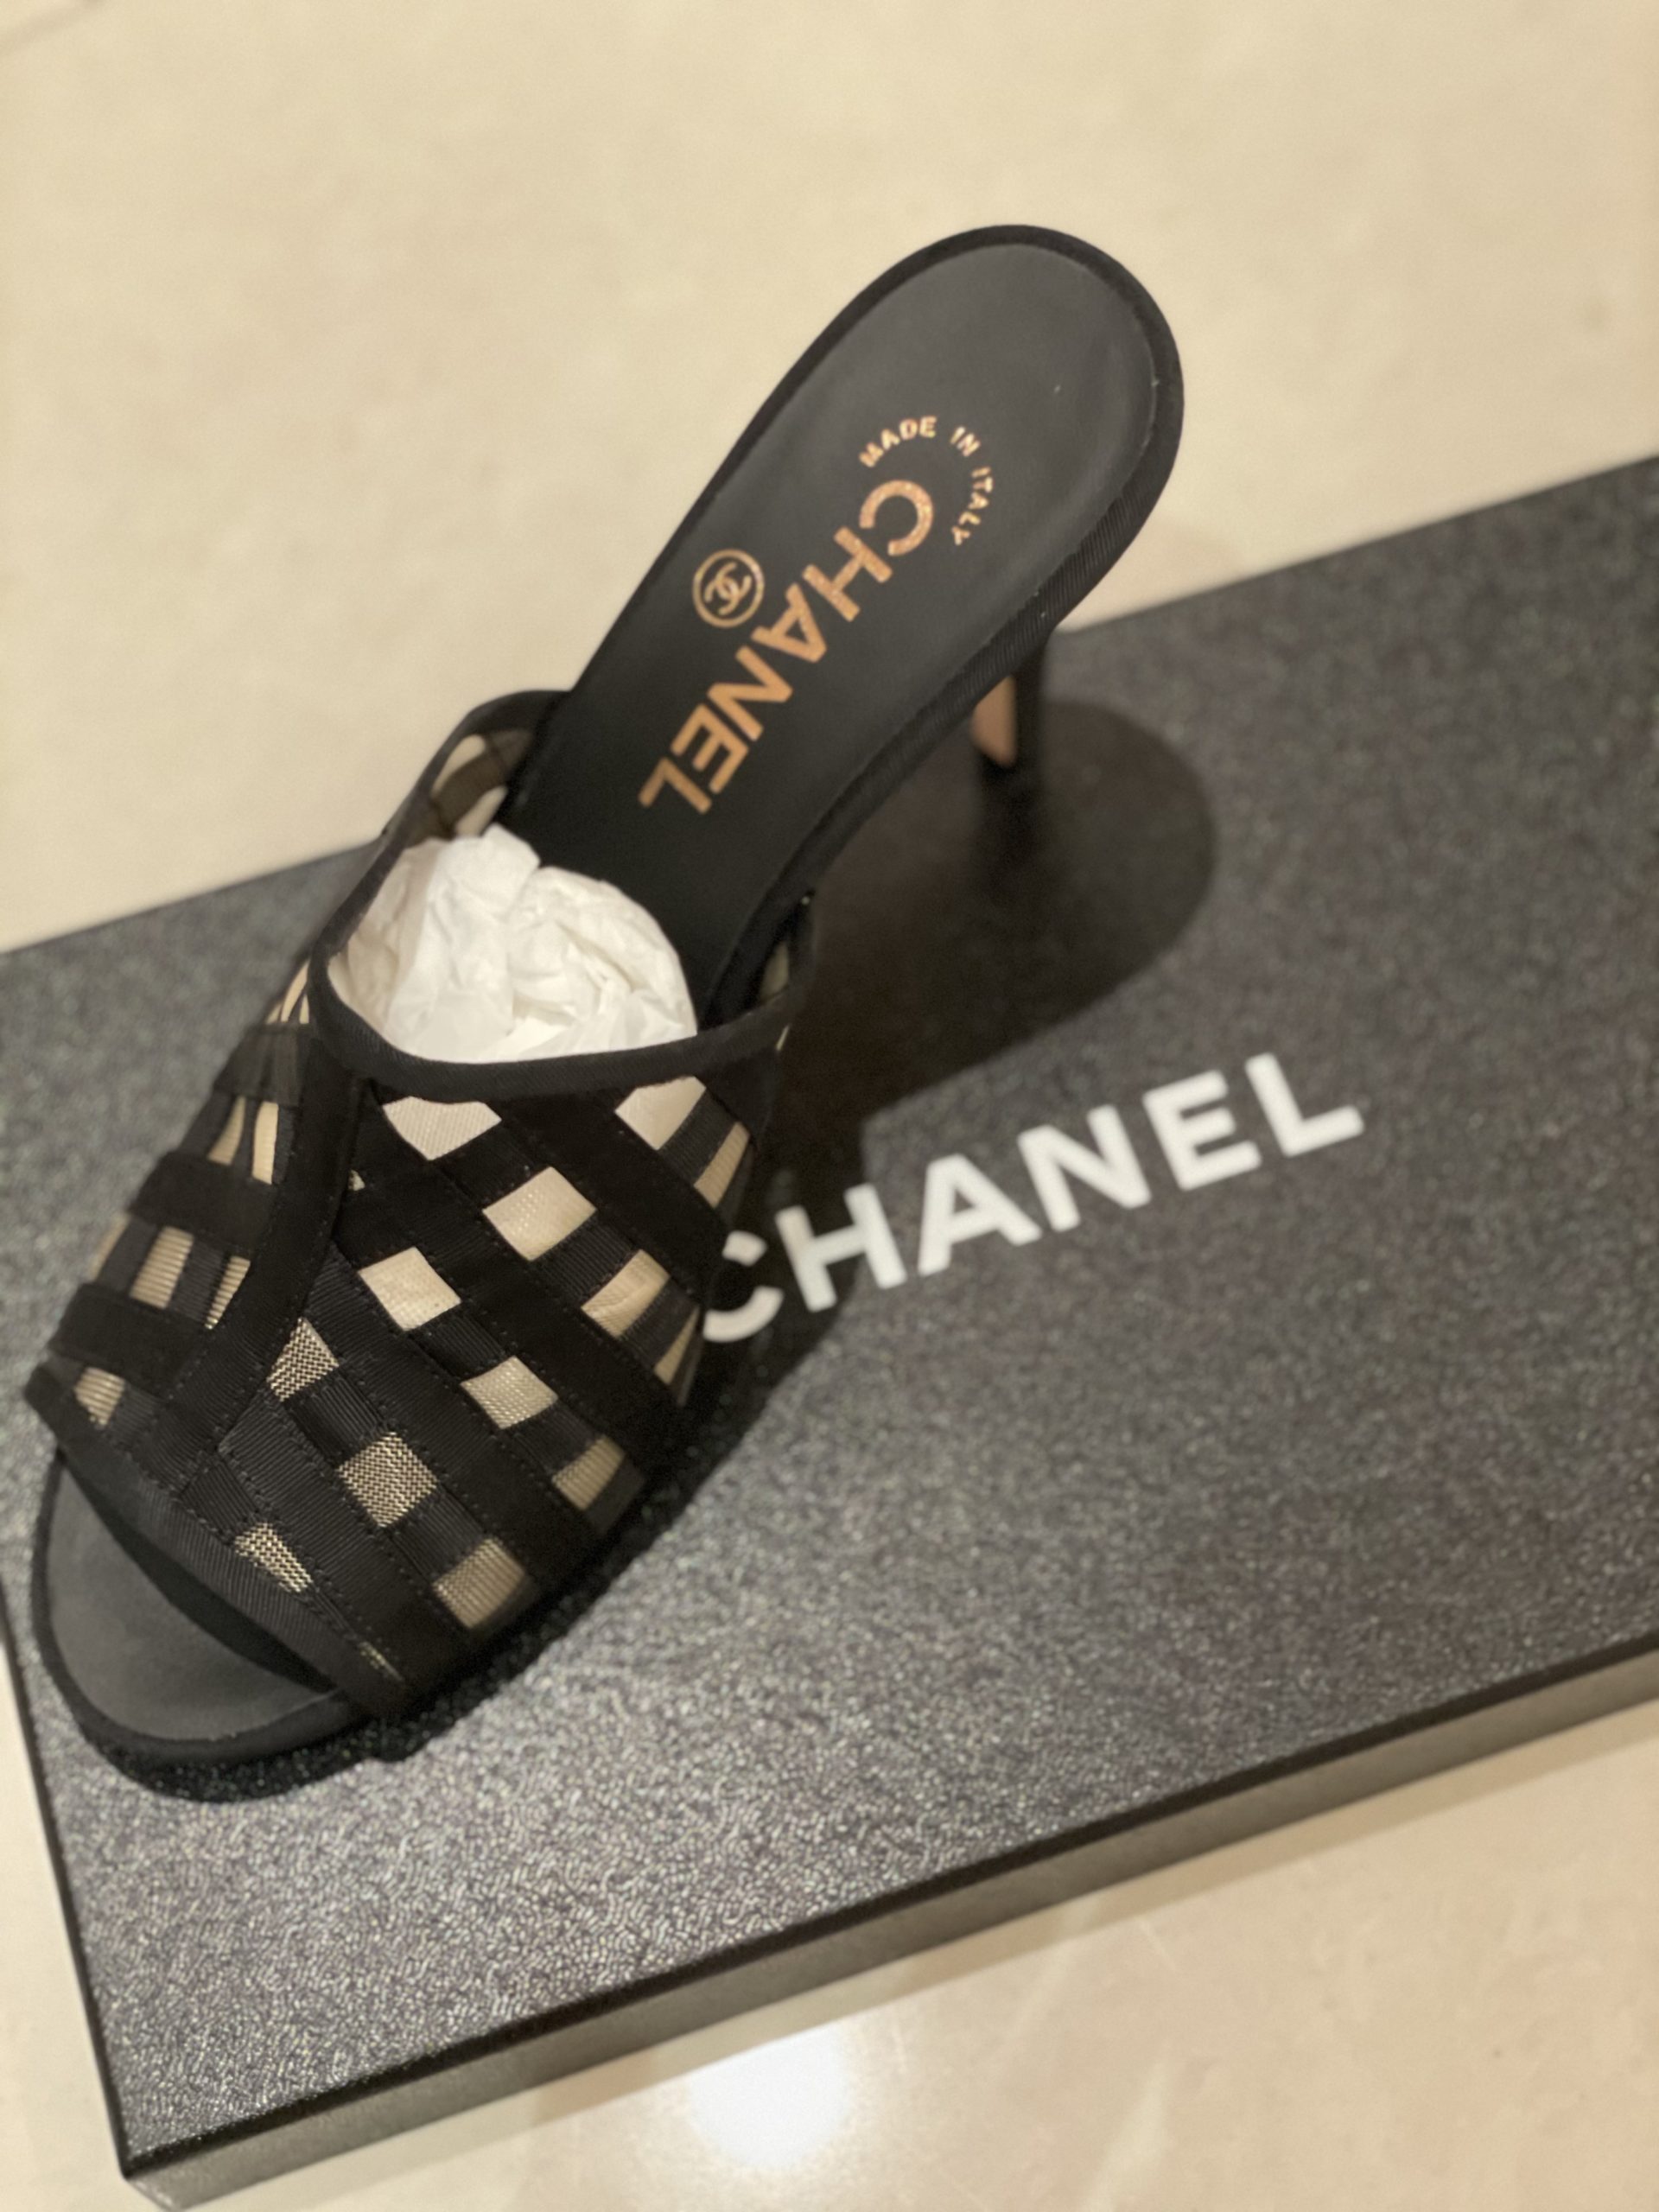 Pre Owned Chanel Heels size 37 EU | Perfect Condition